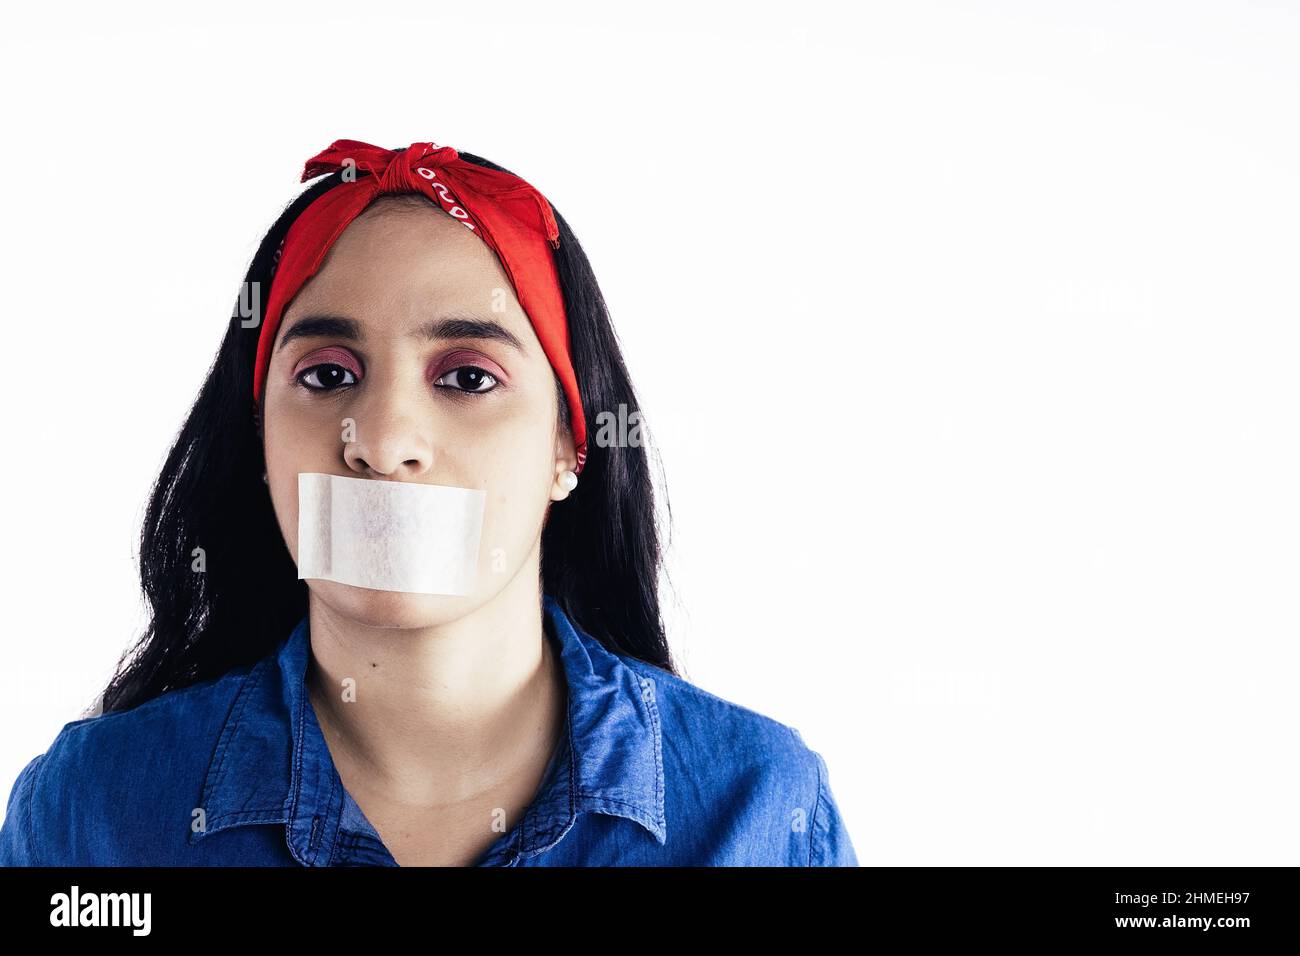 hispanic woman with tape on her mouth concept of feminism, on white background. Stock Photo